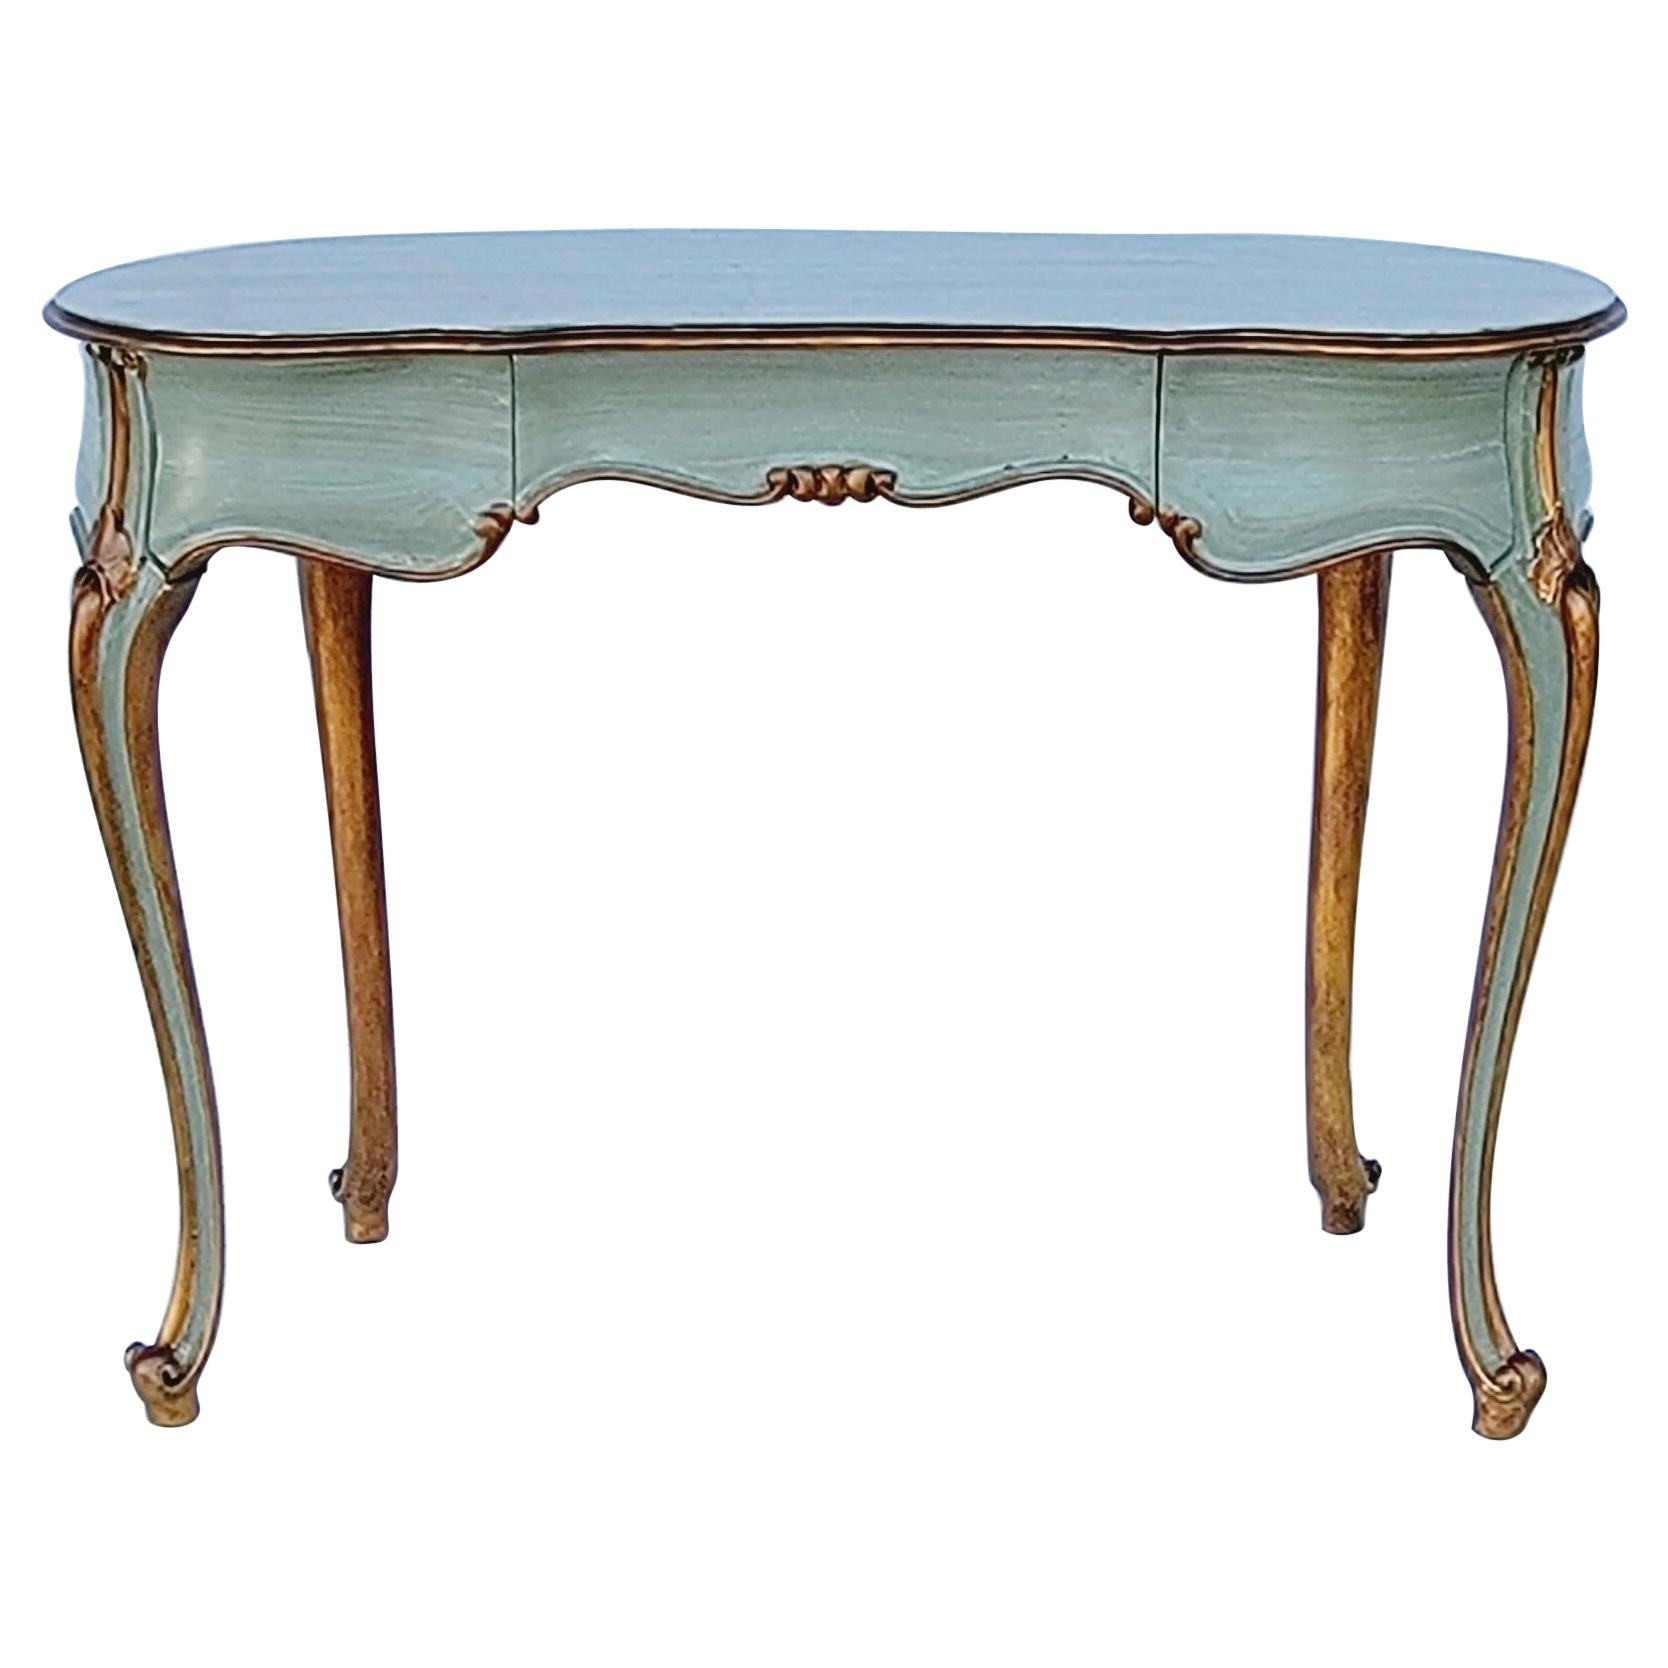 French Carved and Painted Giltwood Kidney Shape Desk / Vanity / Table